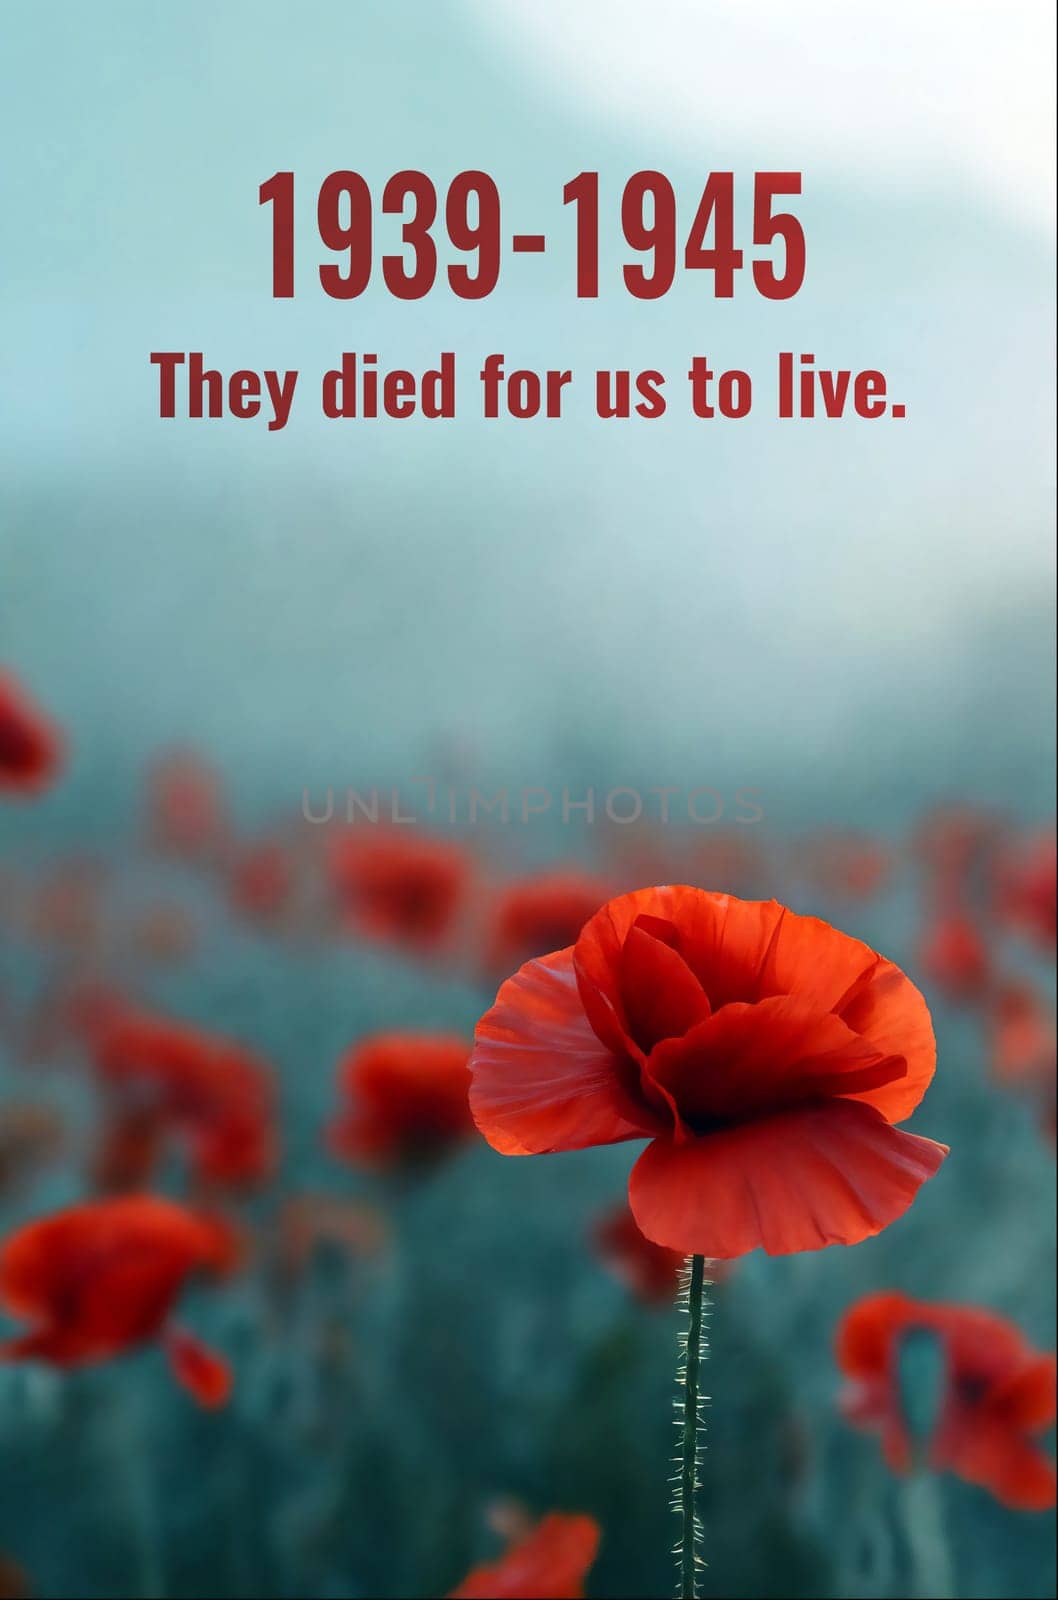 A Red poppy flower in field with quote for